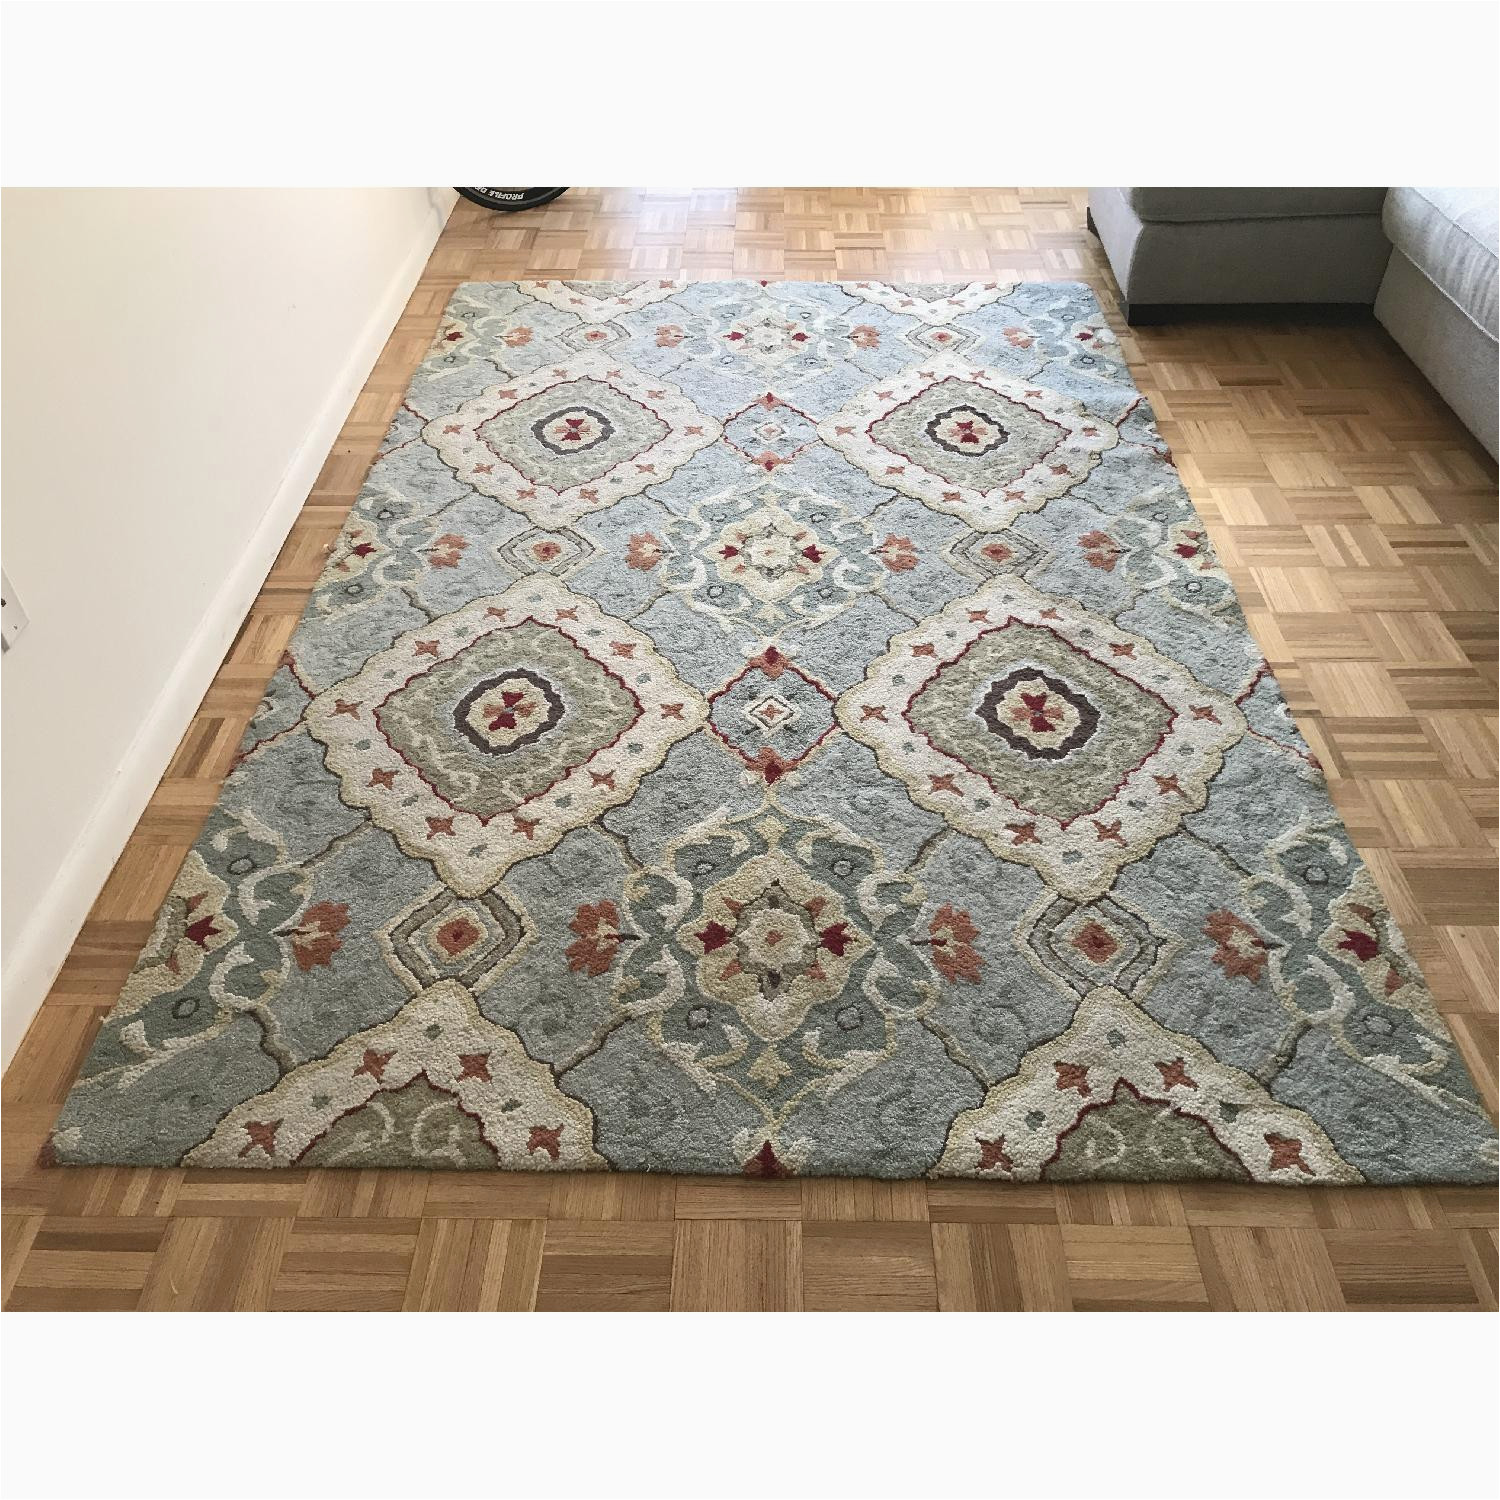 Pier One area Rugs 8 X 10 Pier 1 Imports Tapis area Rug